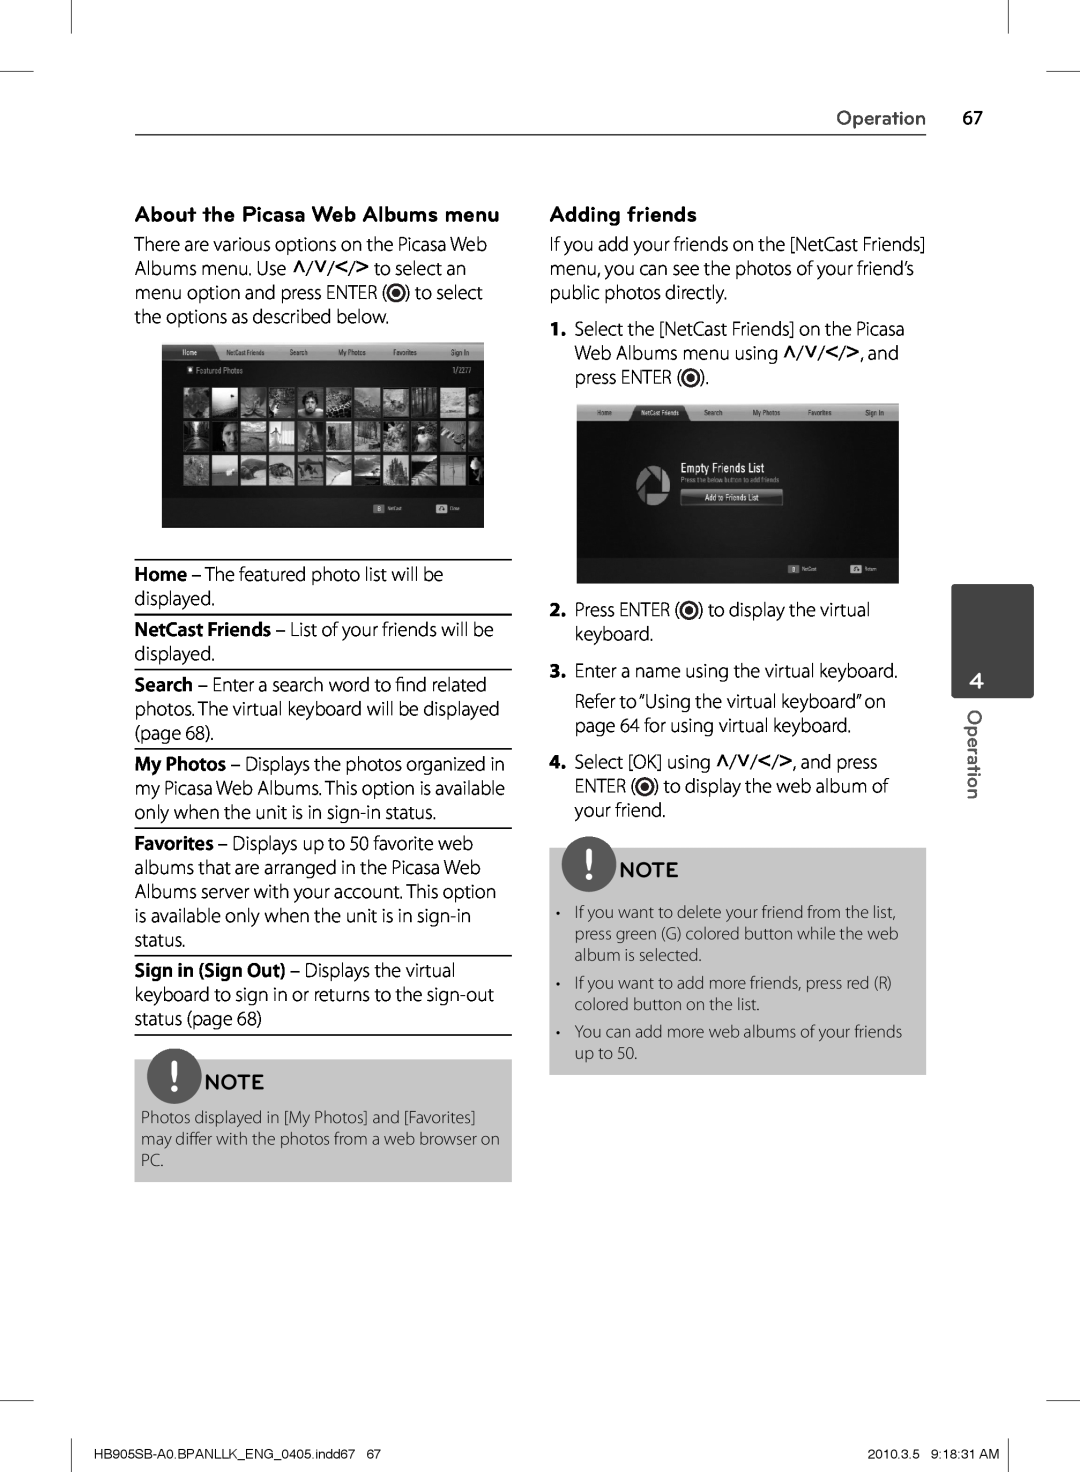 LG Electronics HB905SB owner manual About the Picasa Web Albums menu, Adding friends, Operation 